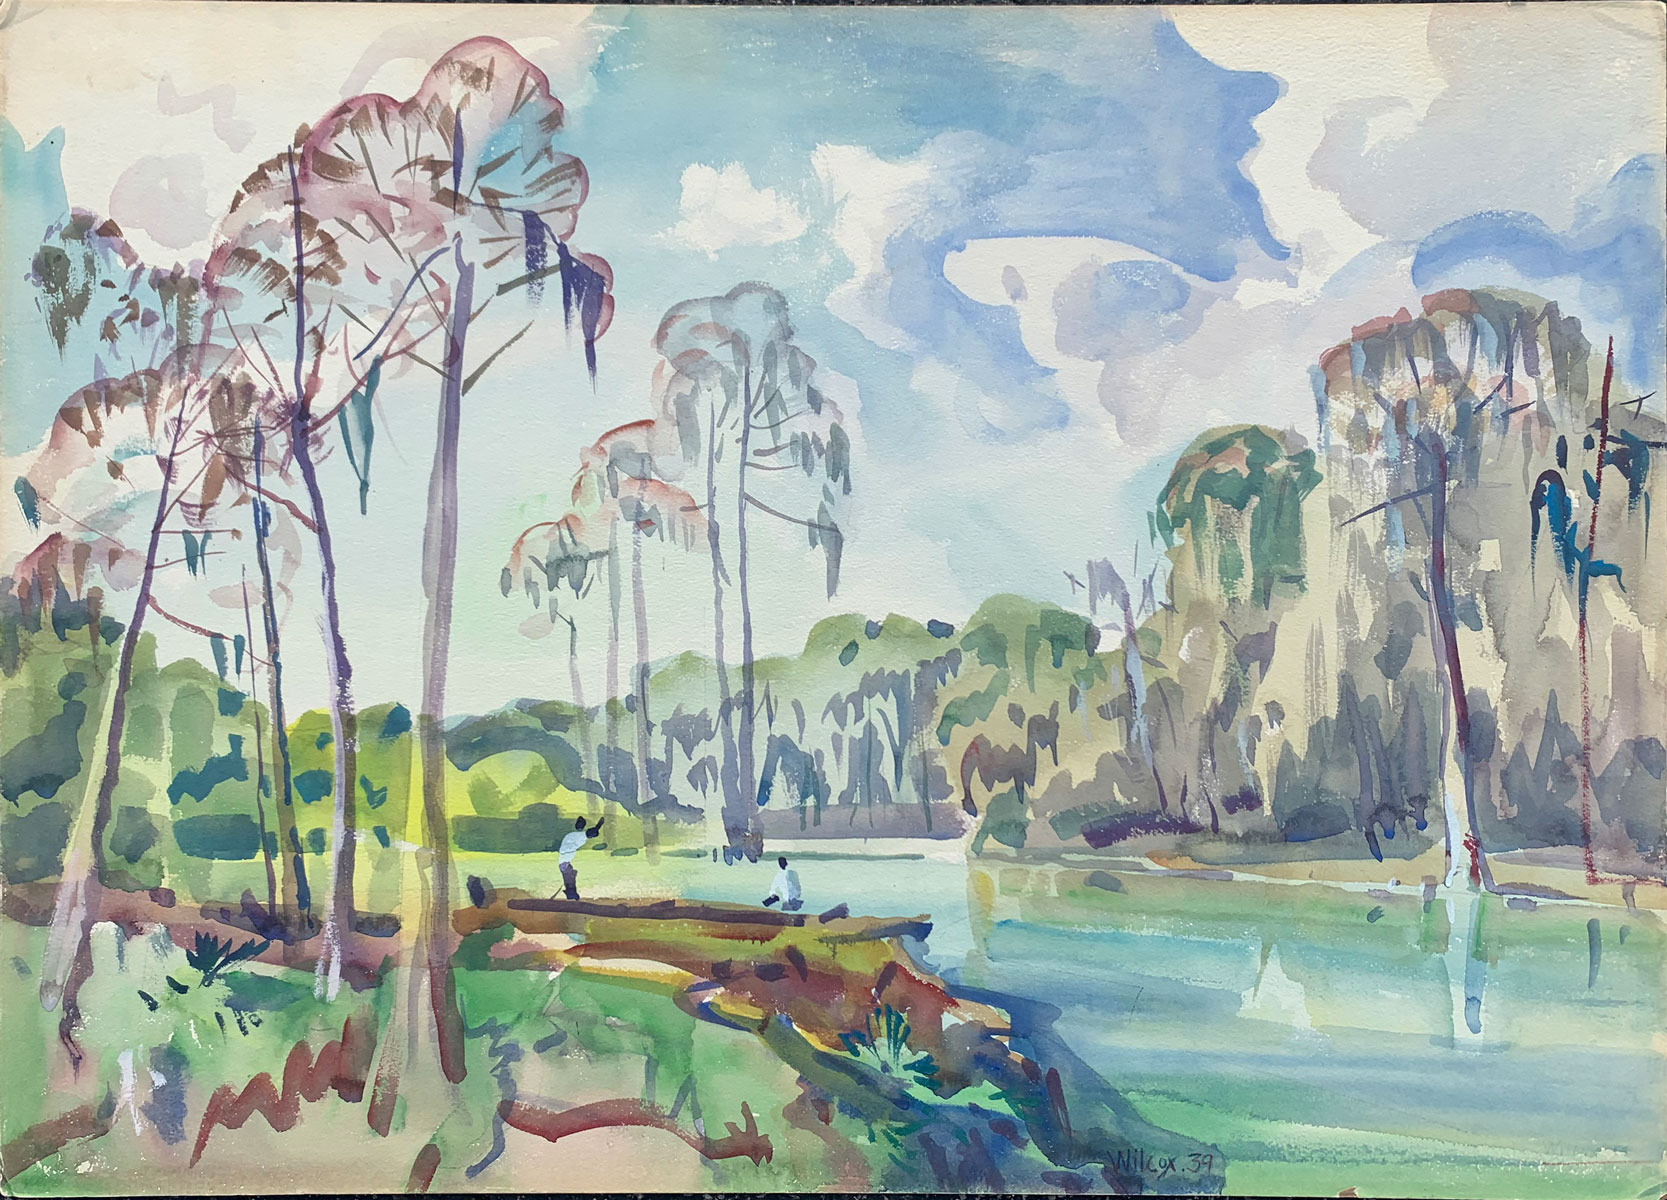 J.R. WILCOX FLORIDA RIVER PAINTING: